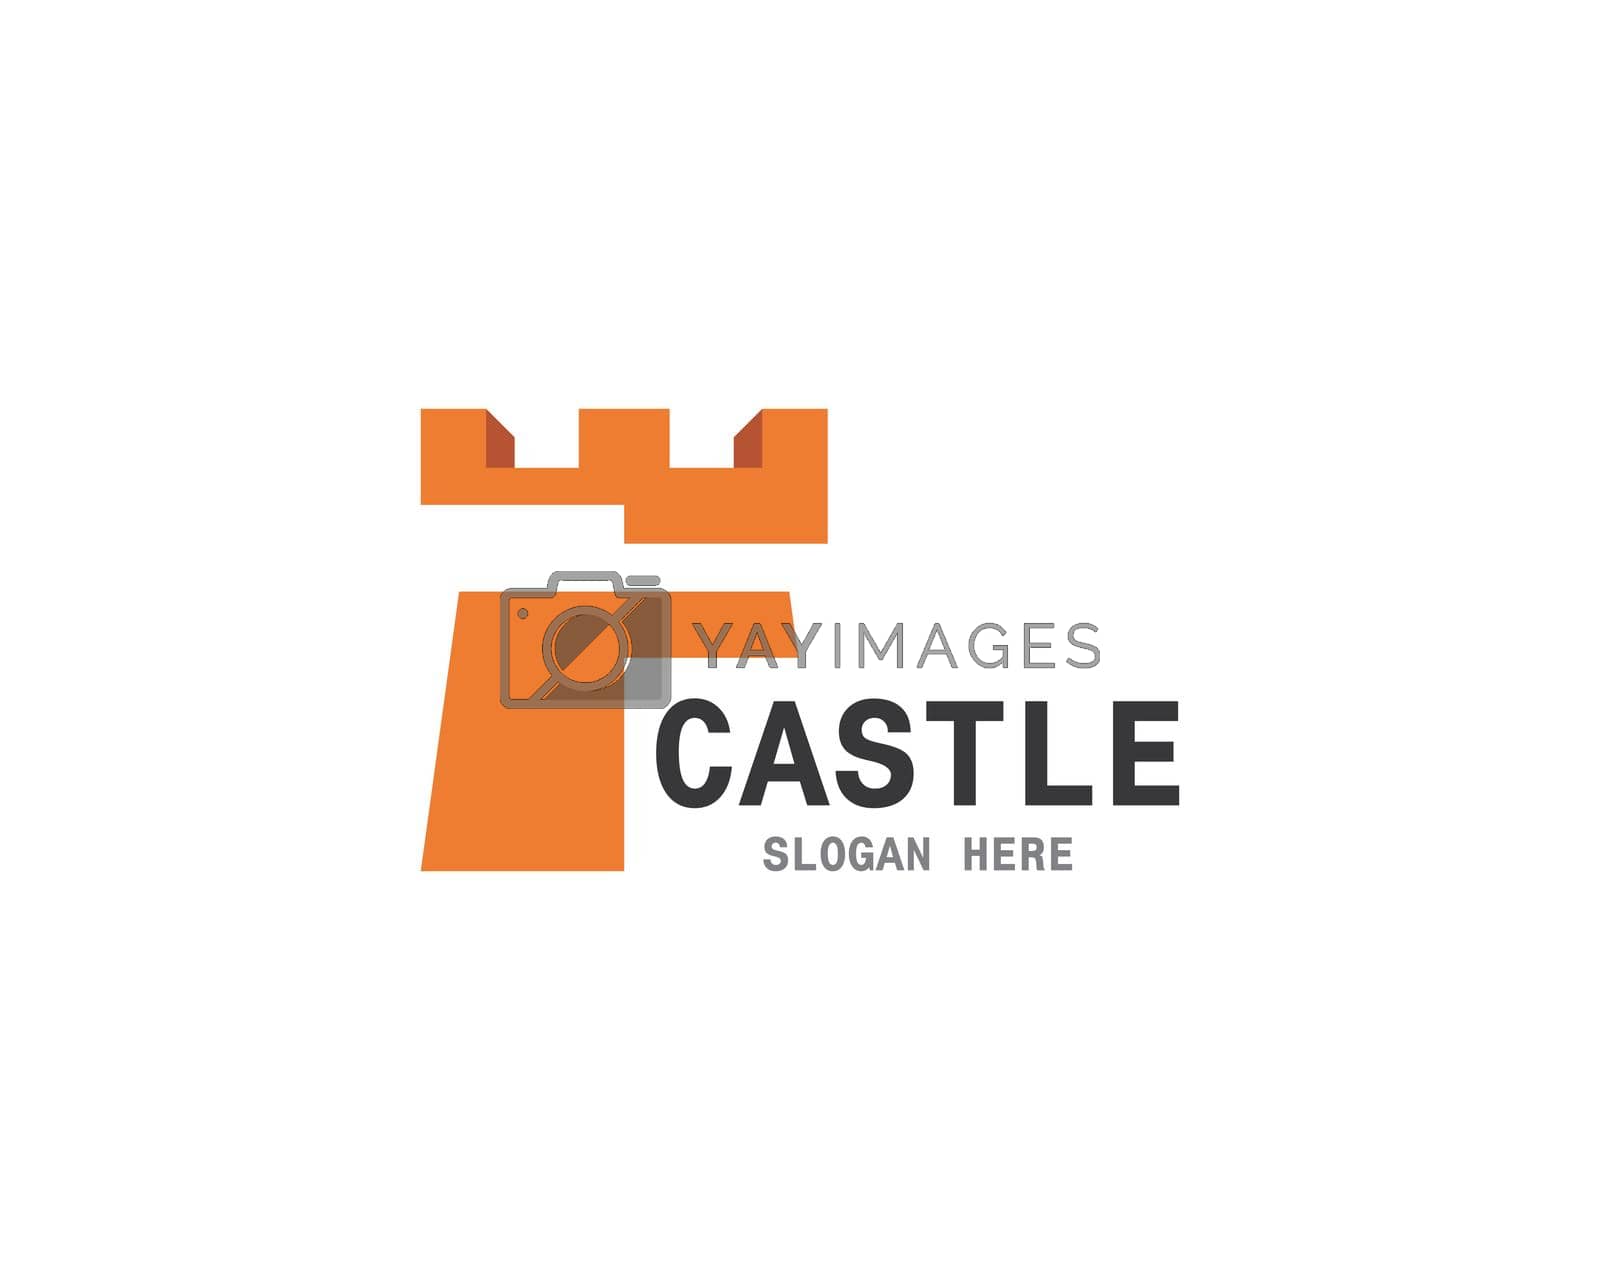 Royalty free image of castle logo vector by awk